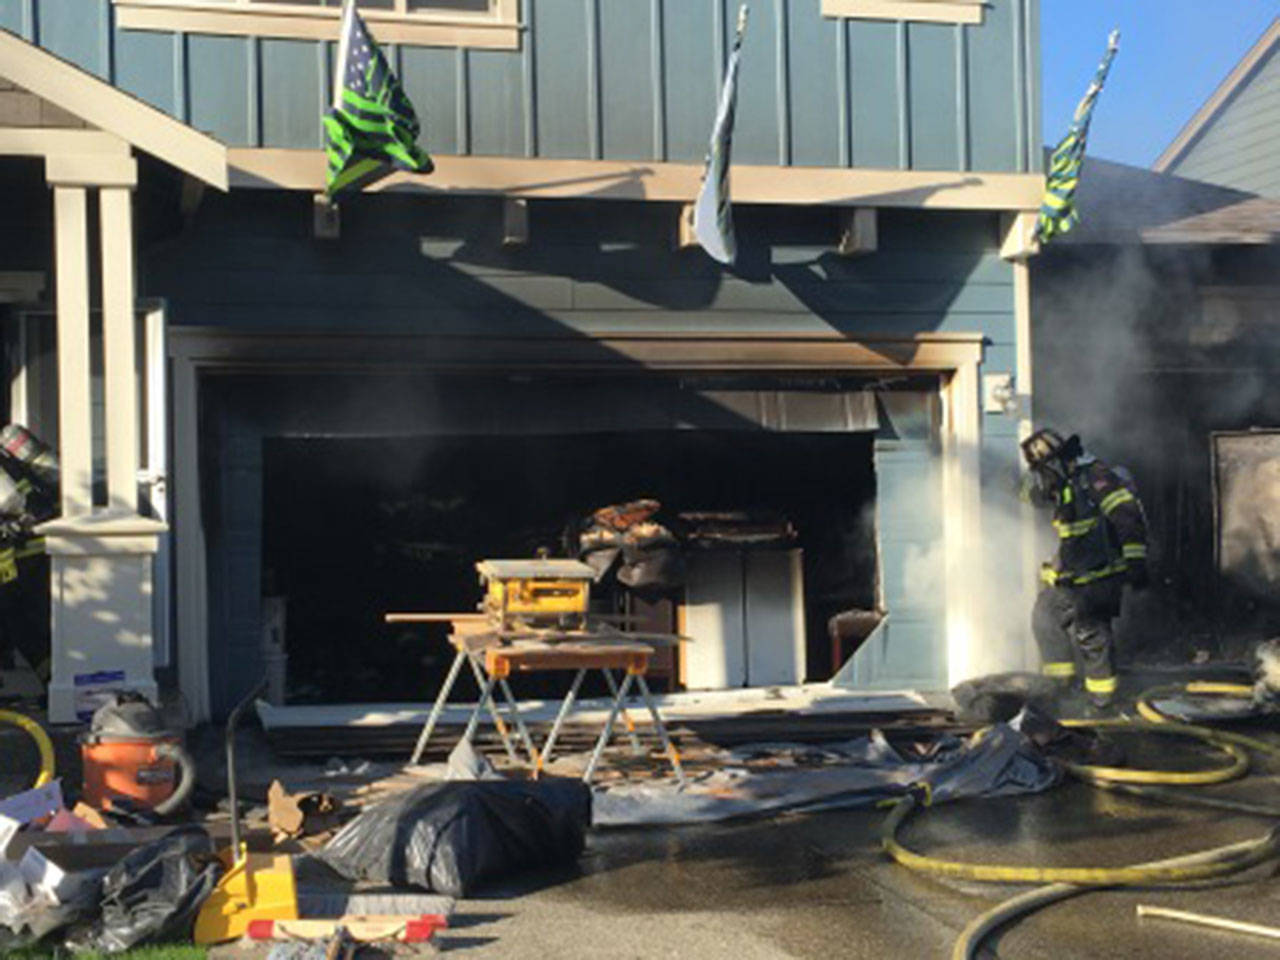 Maple Valley Fire and Life Safety responded to a 2-story house fire